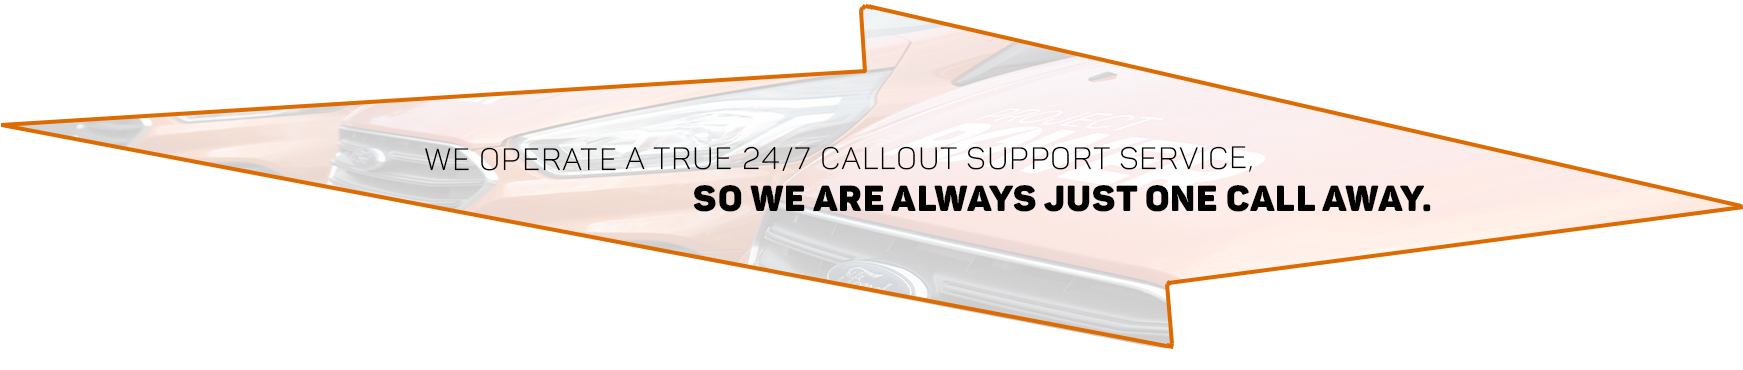 project power callout support